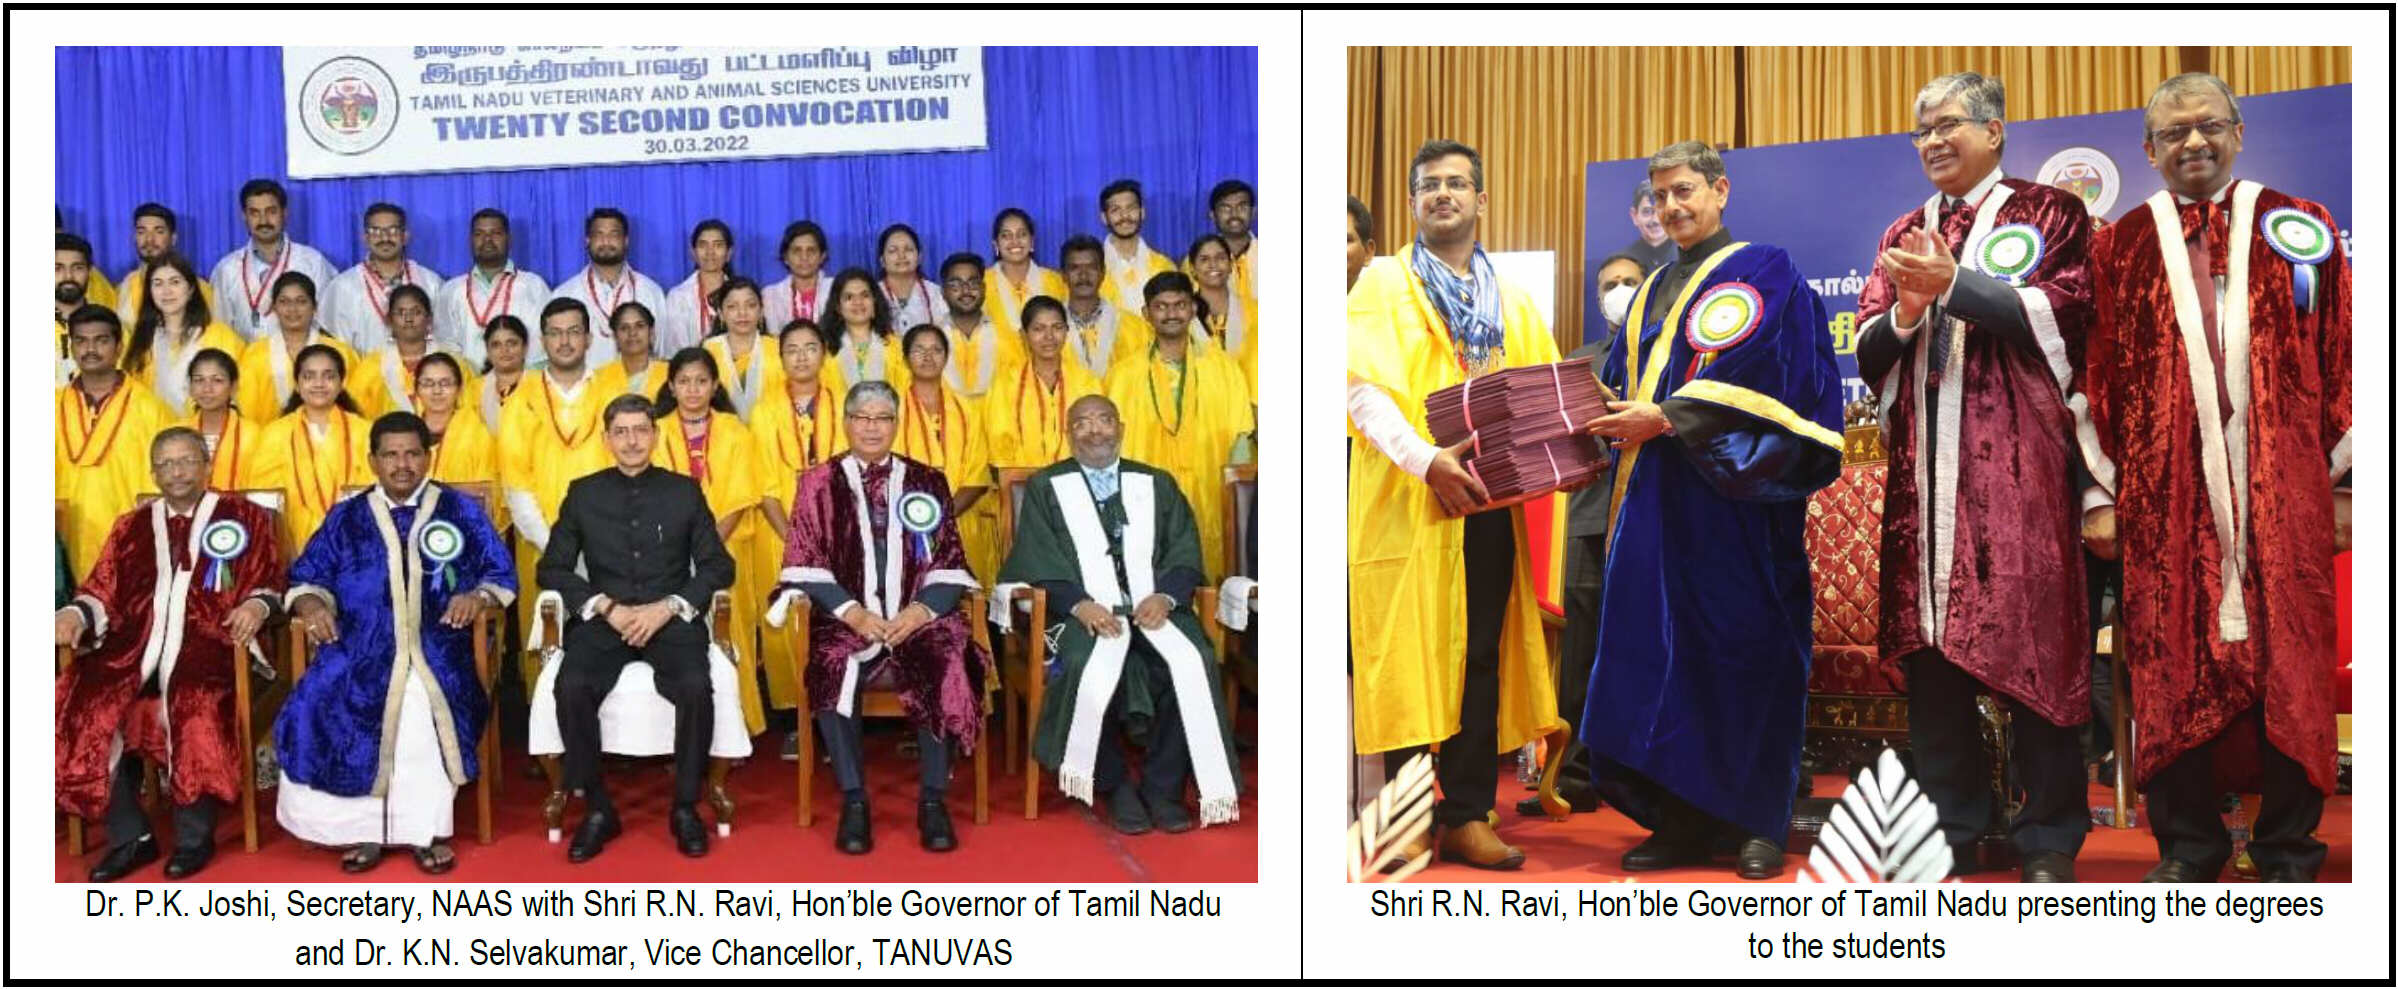 Dr P.K. Joshi, Secretary honoured as Chief Guest in the 22nd Convocation of Tamil Nadu Unversity of Veterinary and Animal Sciences (TANUVAS)